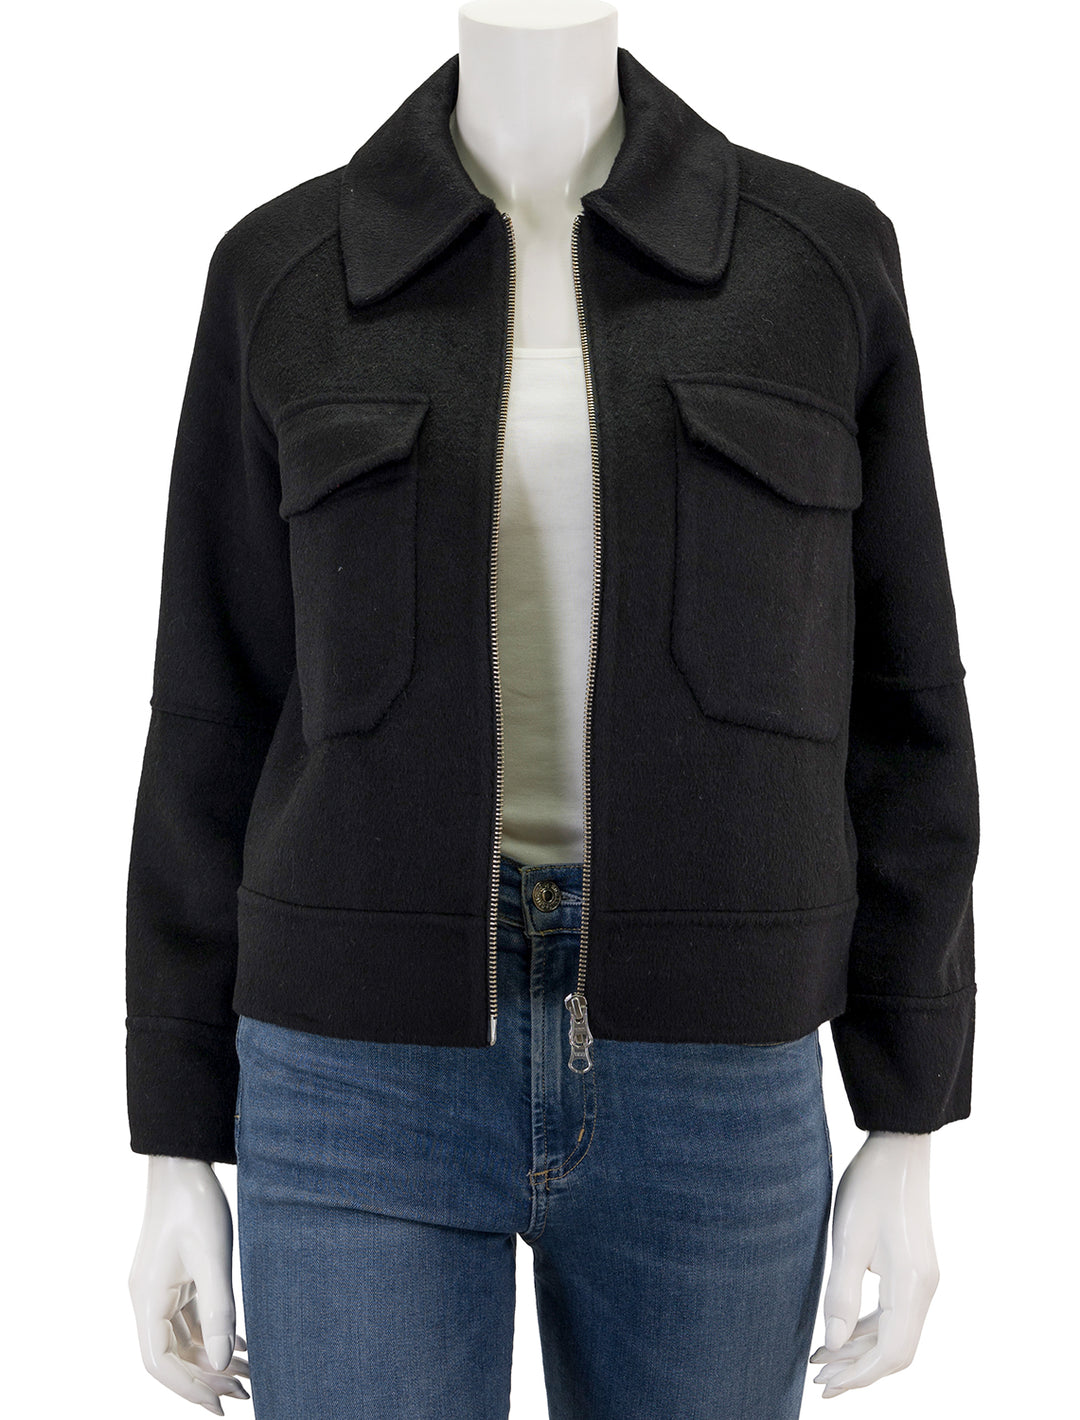 Front view of Rails' cheyenne jacket in black, unzipped.